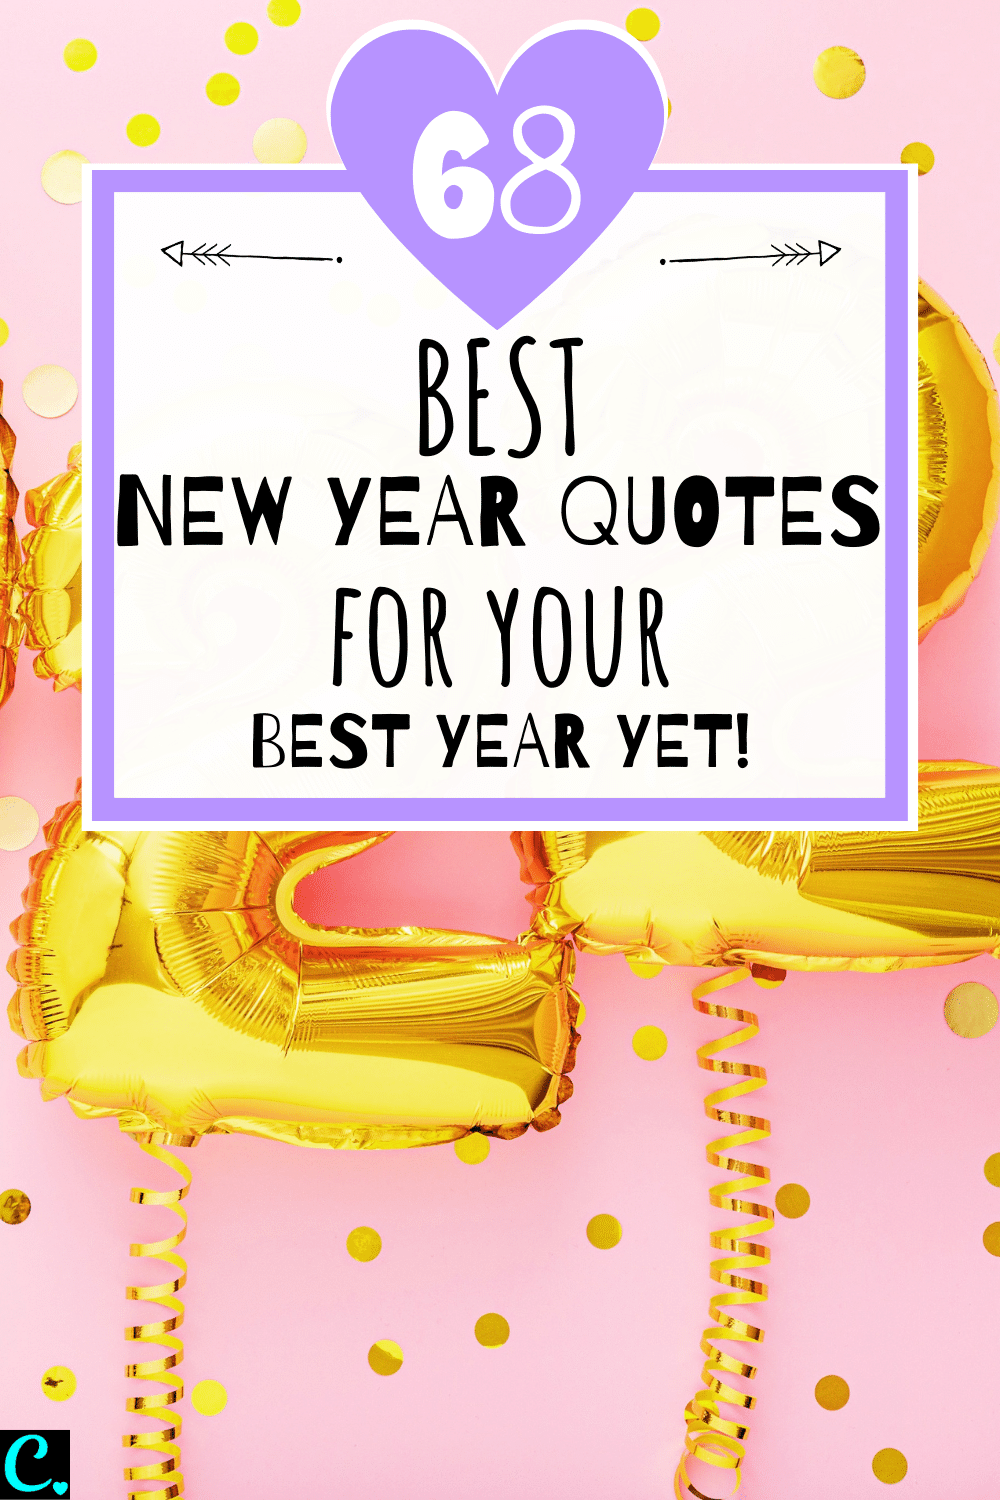 68 Best New Years Quotes For Your Best Year Yet! 